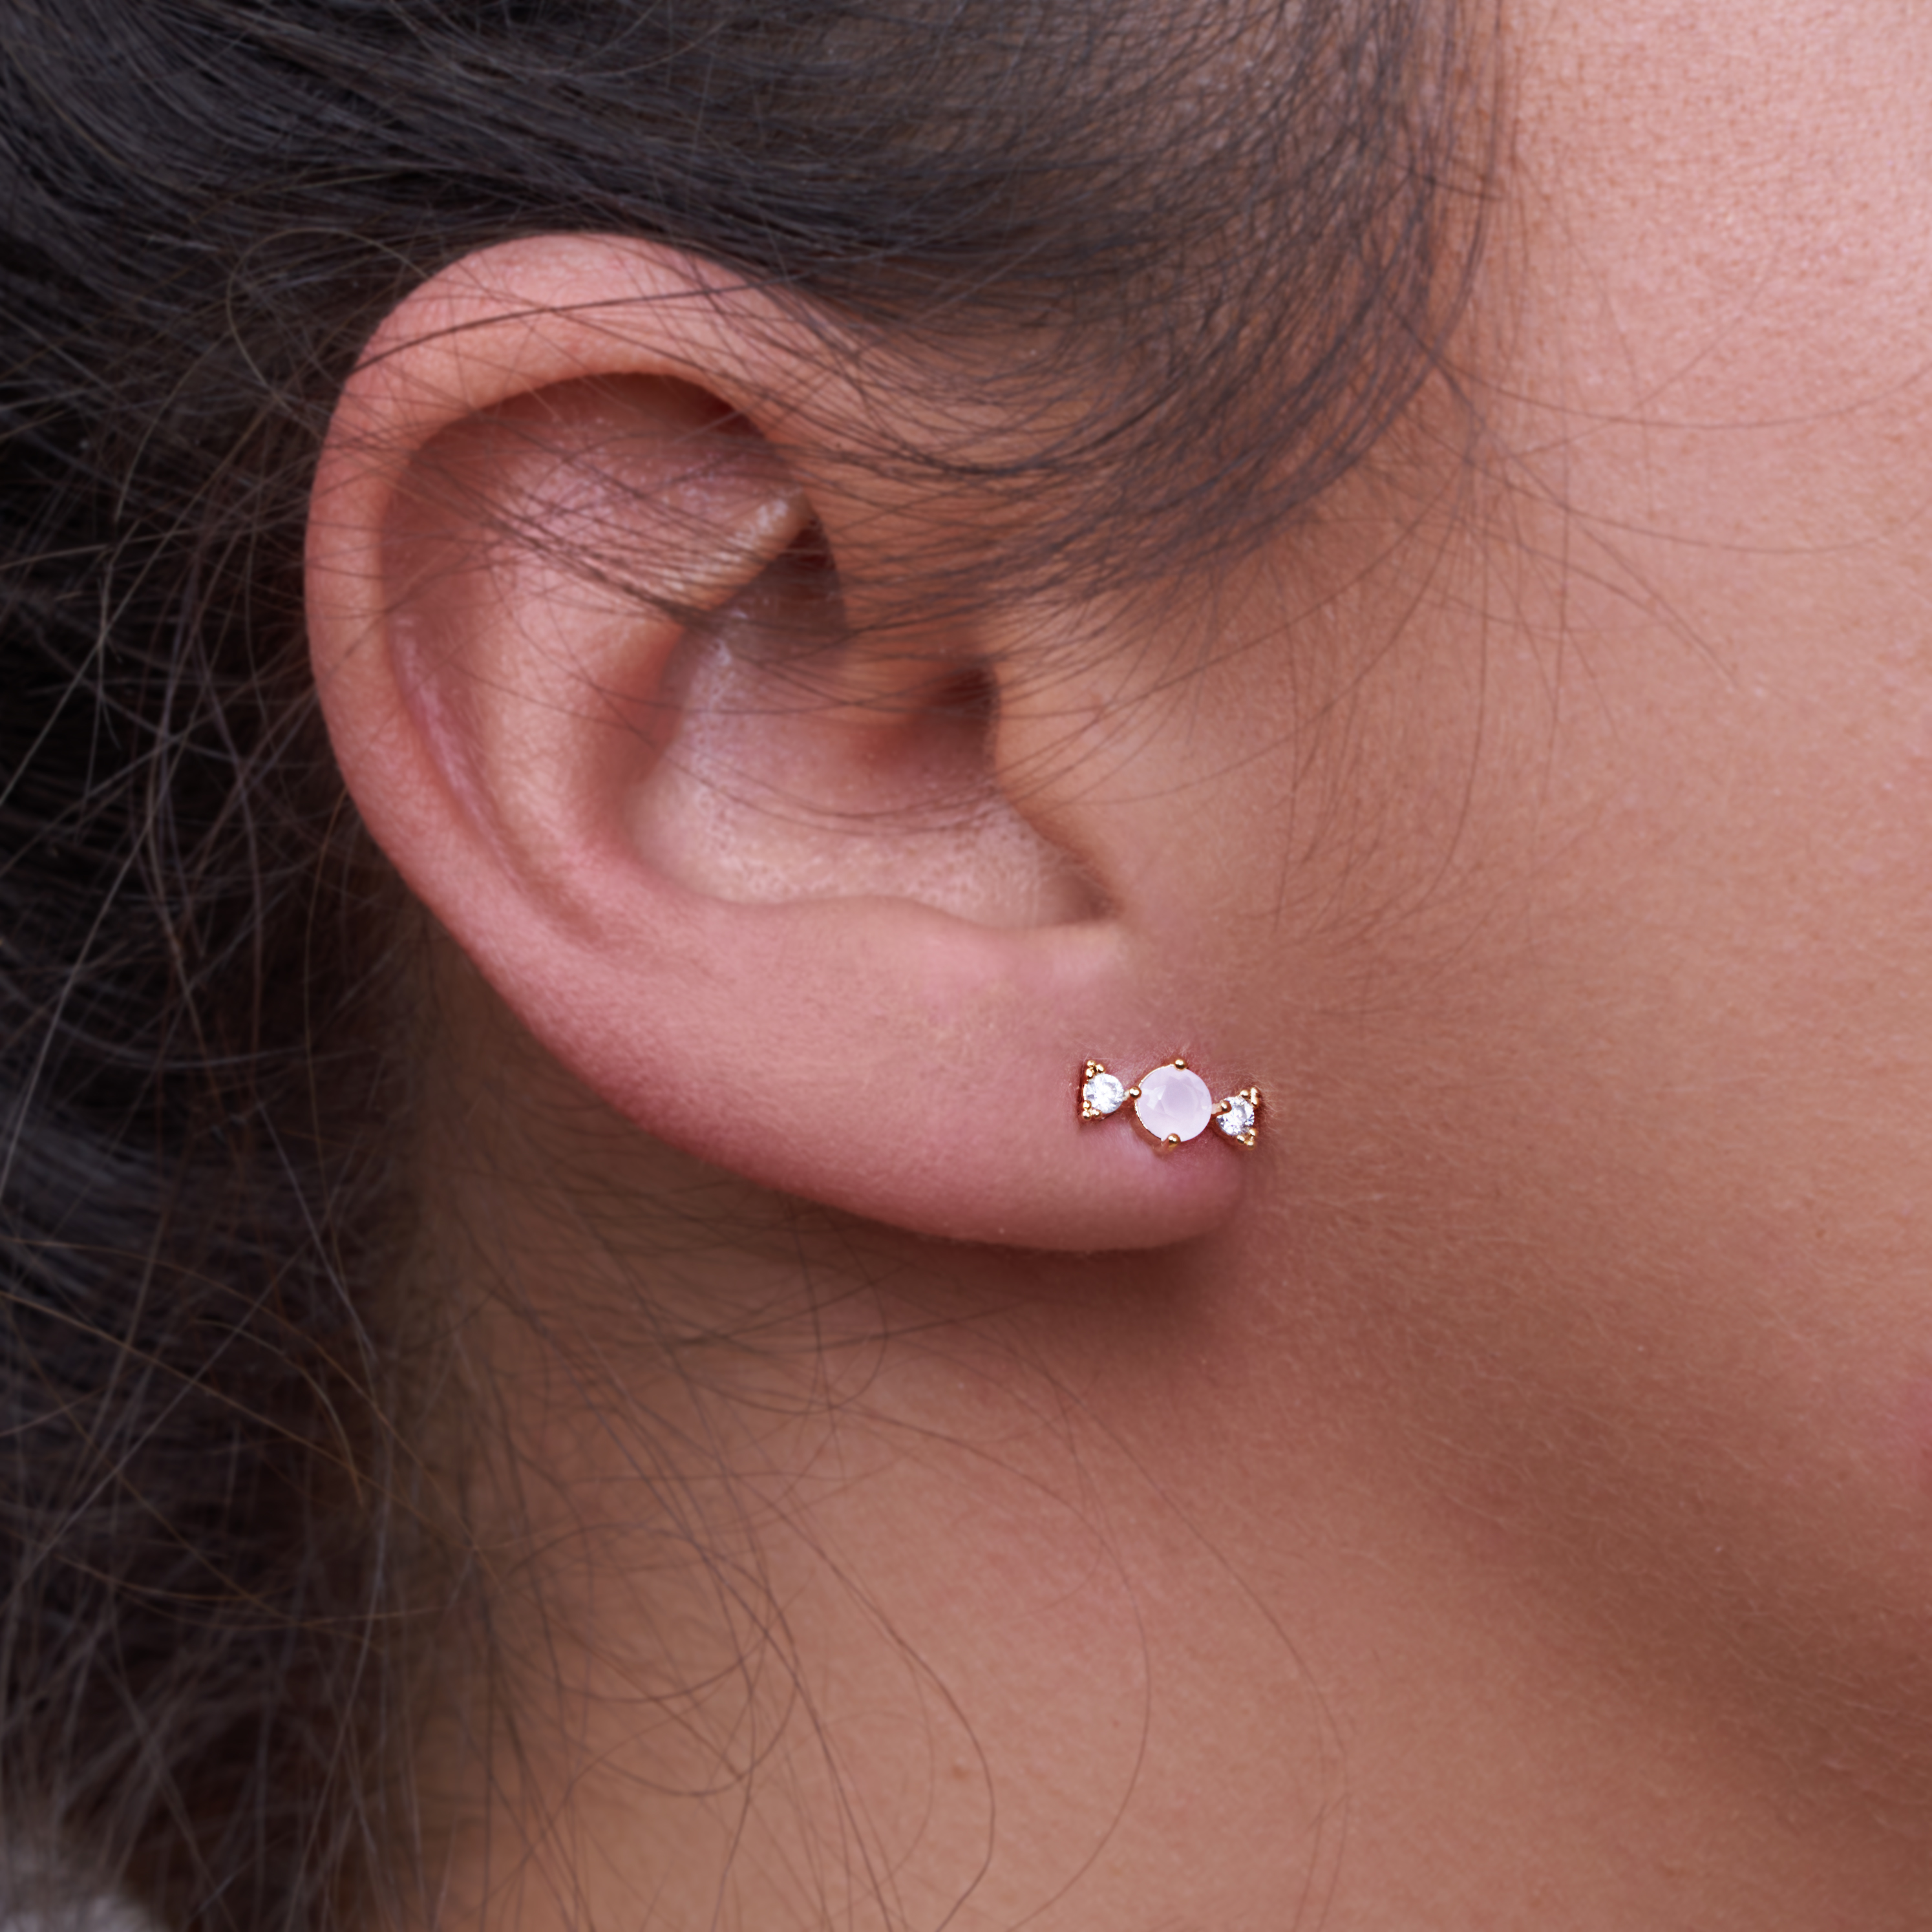 Pink Candy Plated Earring